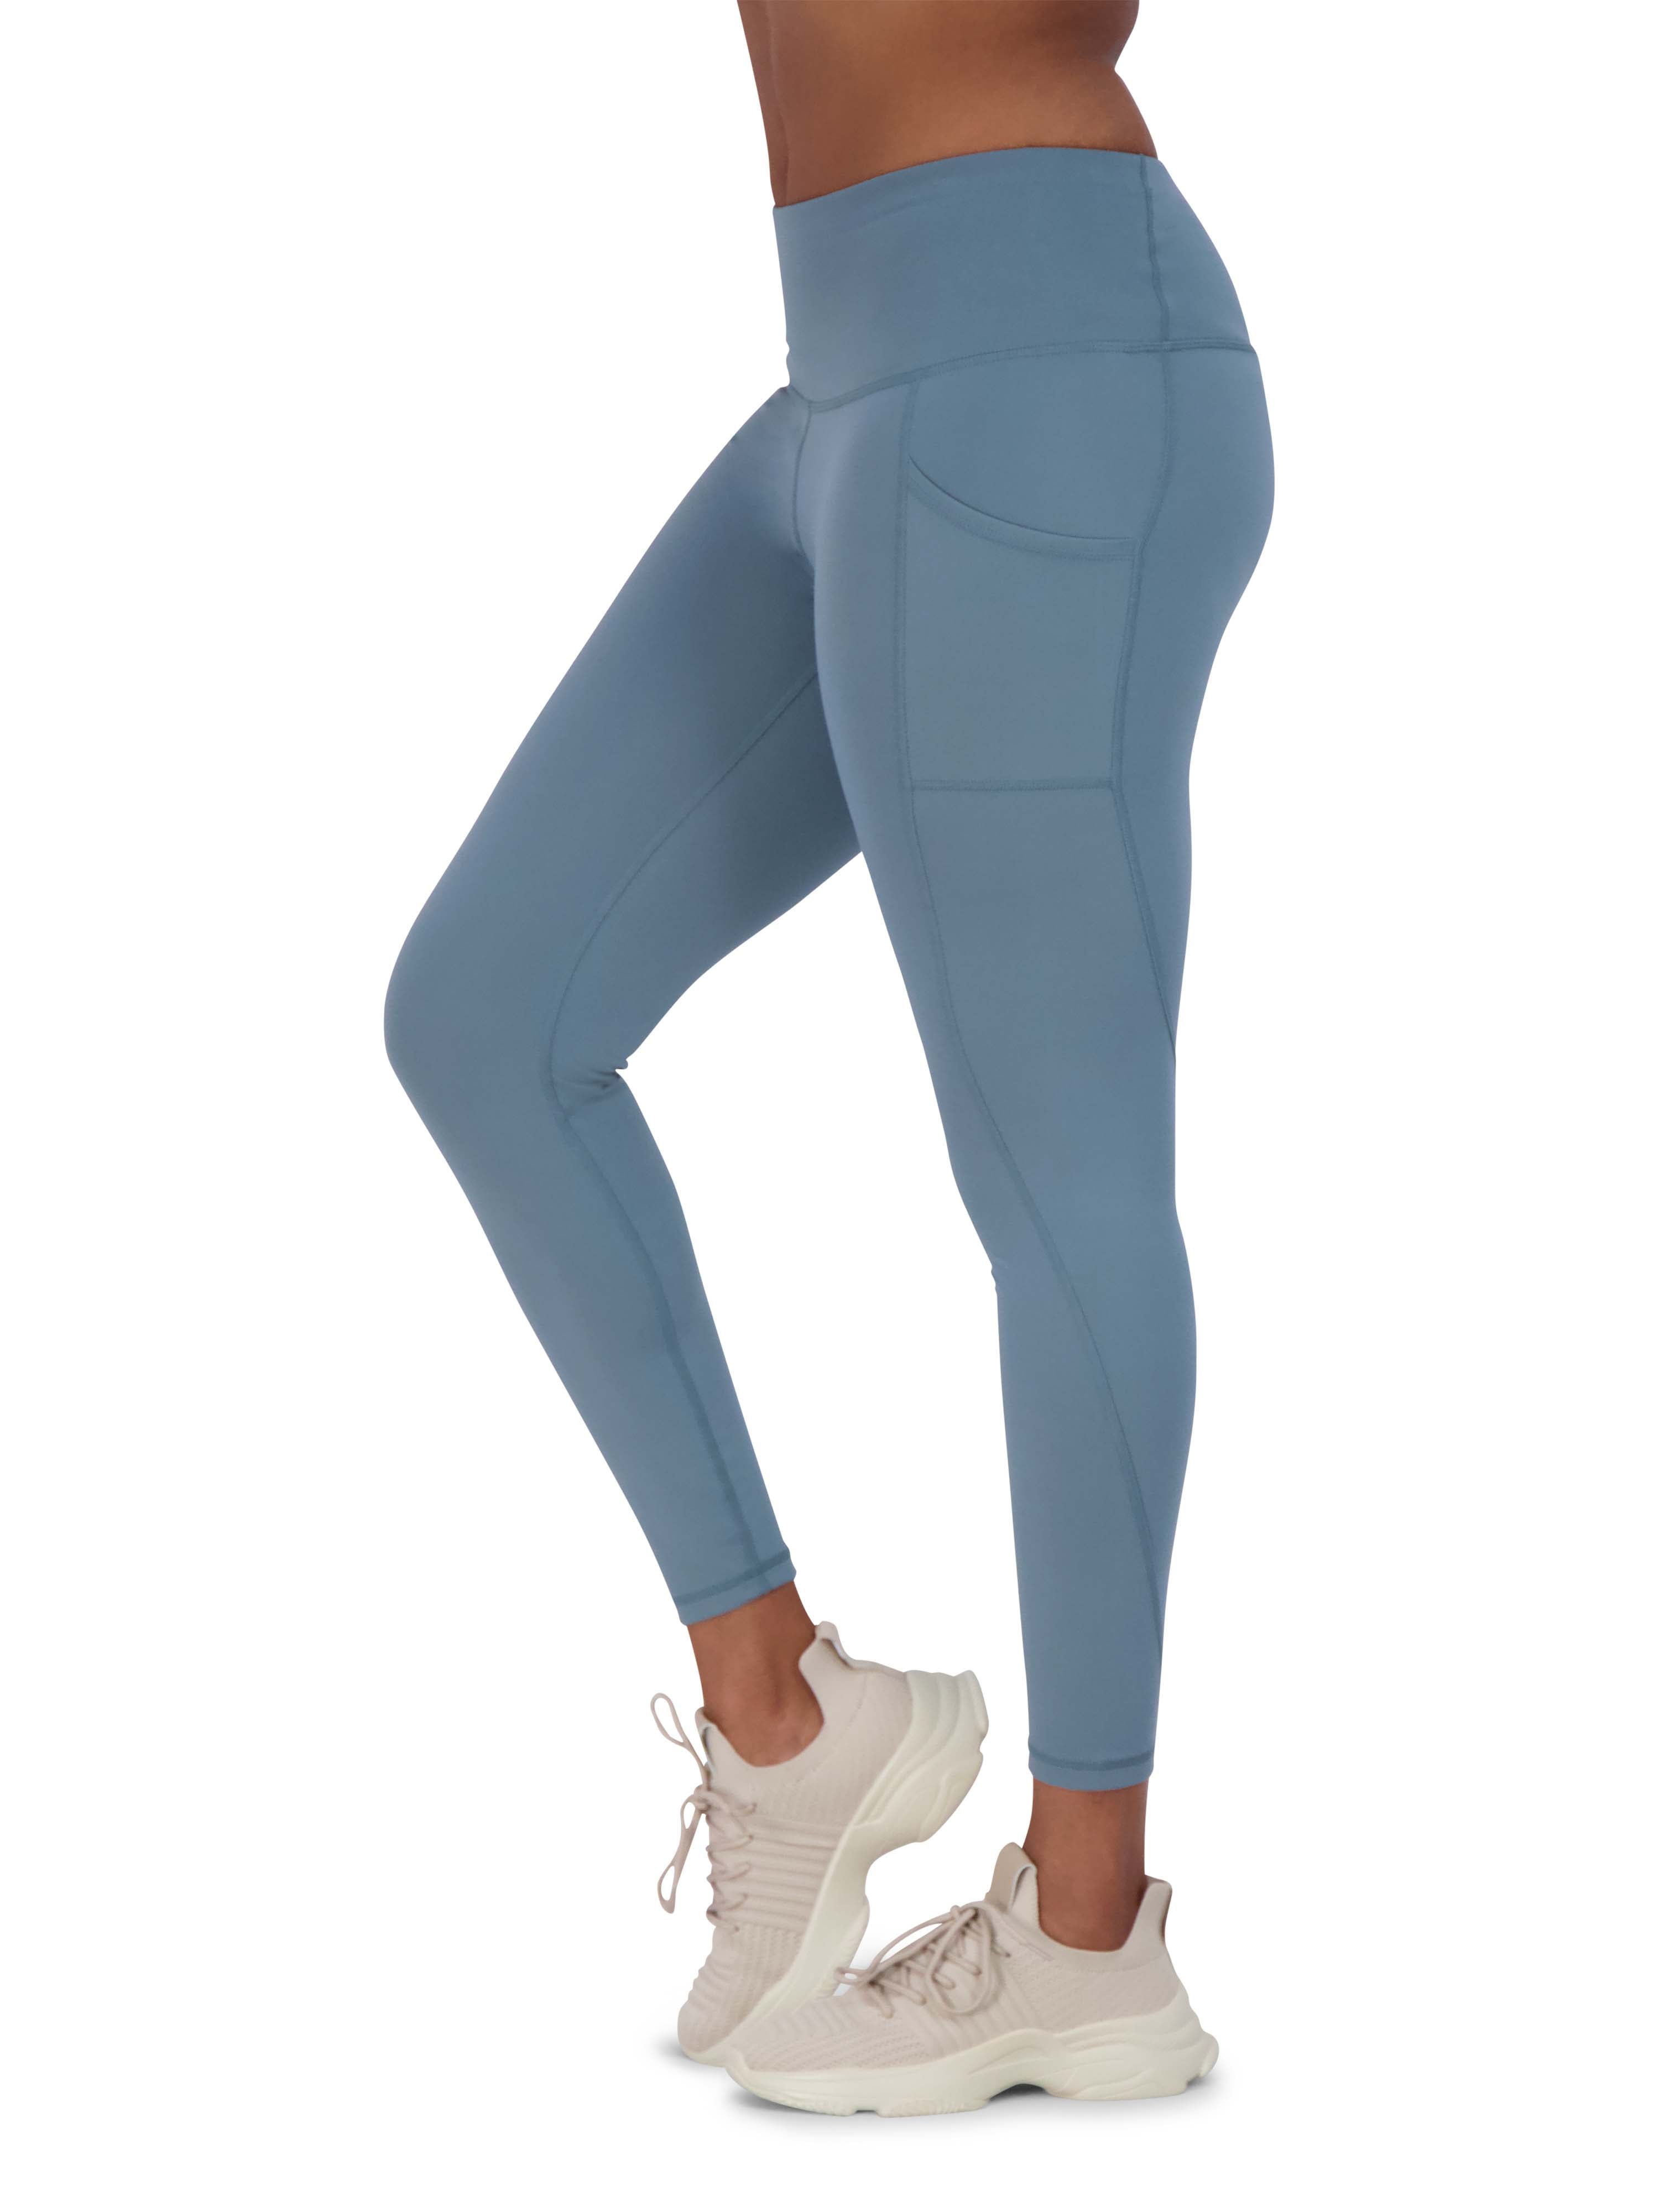 Women's High Rise Moisture Wicking Yoga 7/8 Legging with Side Pockets